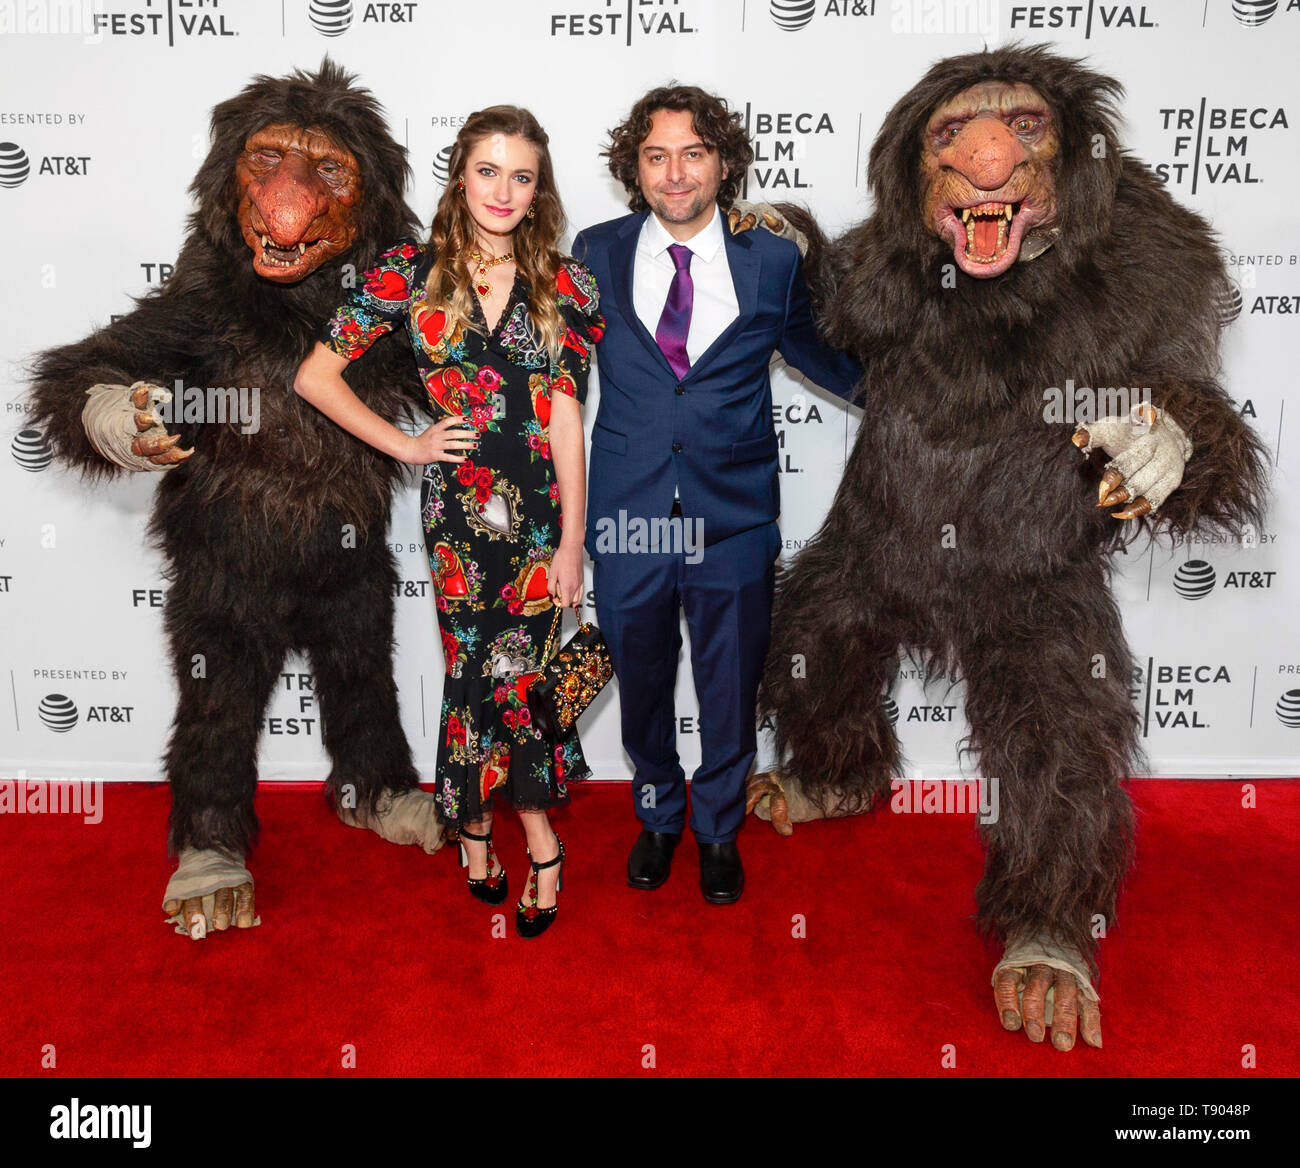 New York, NY - April 27, 2019: Nicole Elizabeth Berger, Mario Torres and Grumblers - Boomer and Morse attend the premiere of the 'The Place of No Word Stock Photo